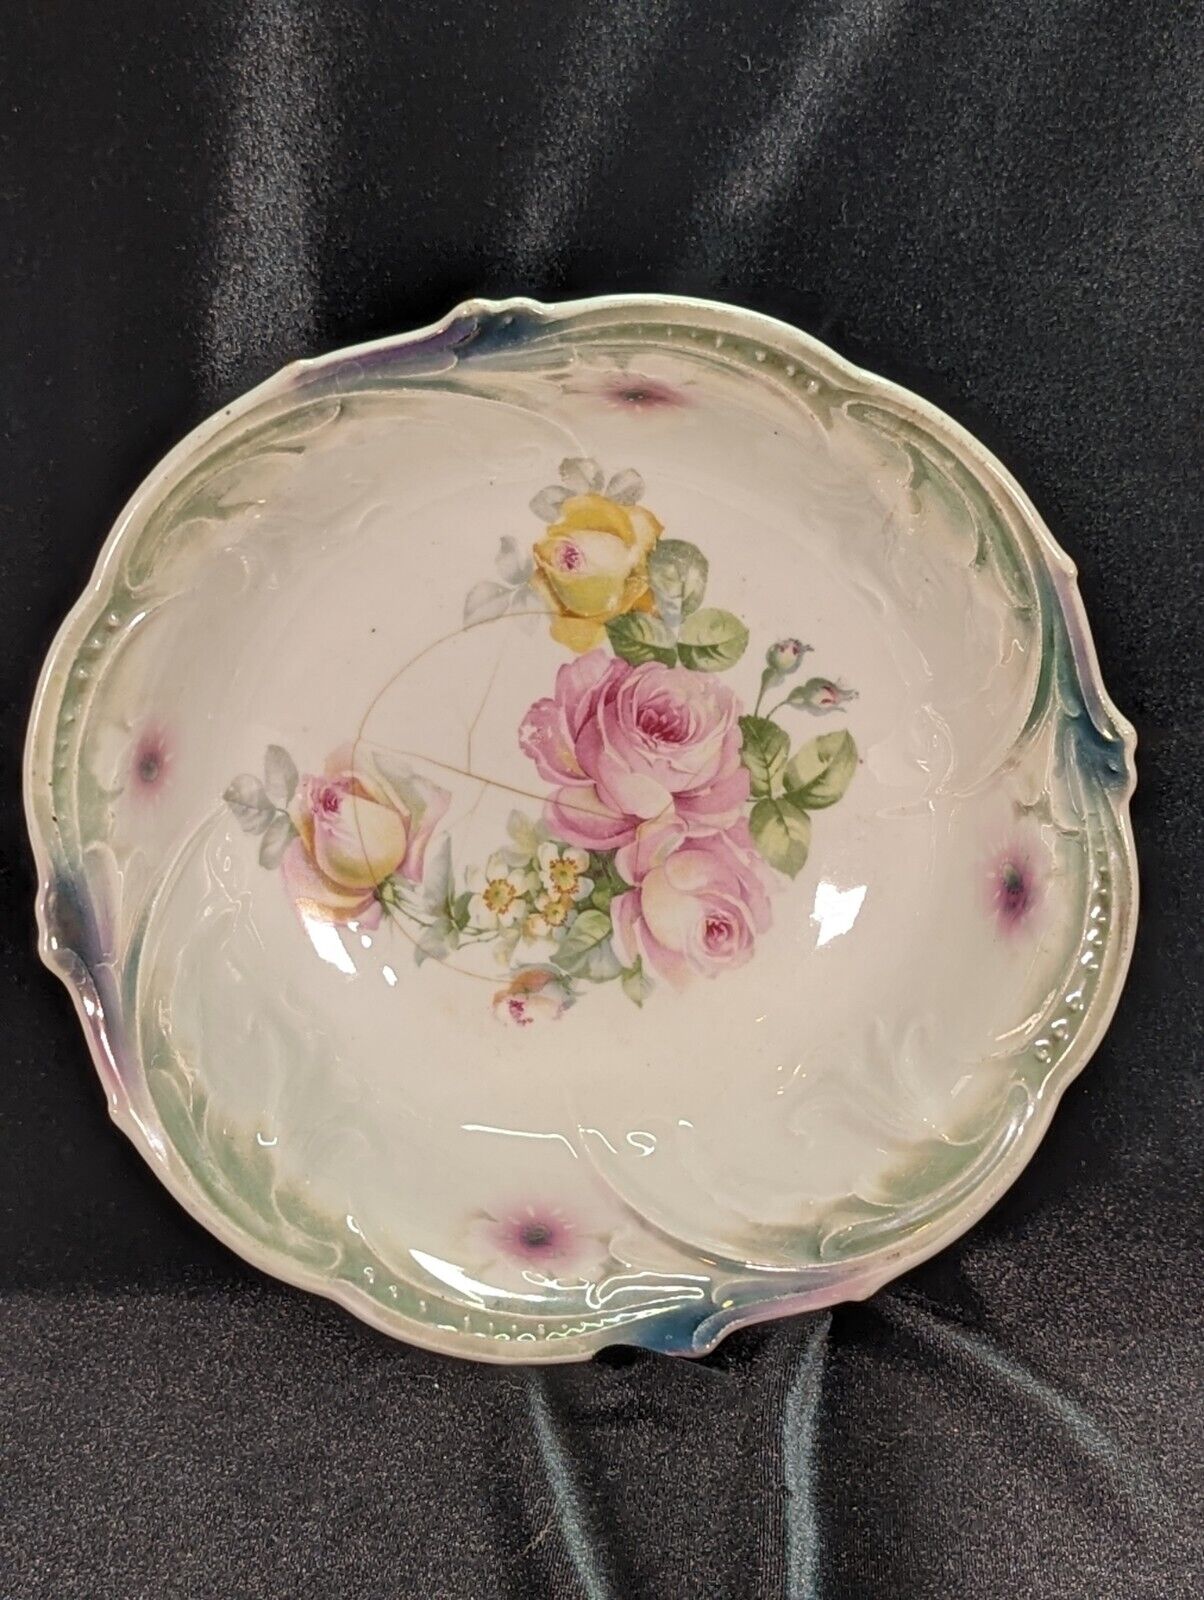 ANTIQUE PORCELAIN FLORAL BOWL 10” MADE IN GERMANY BEAUTIFUL 🌺 💐